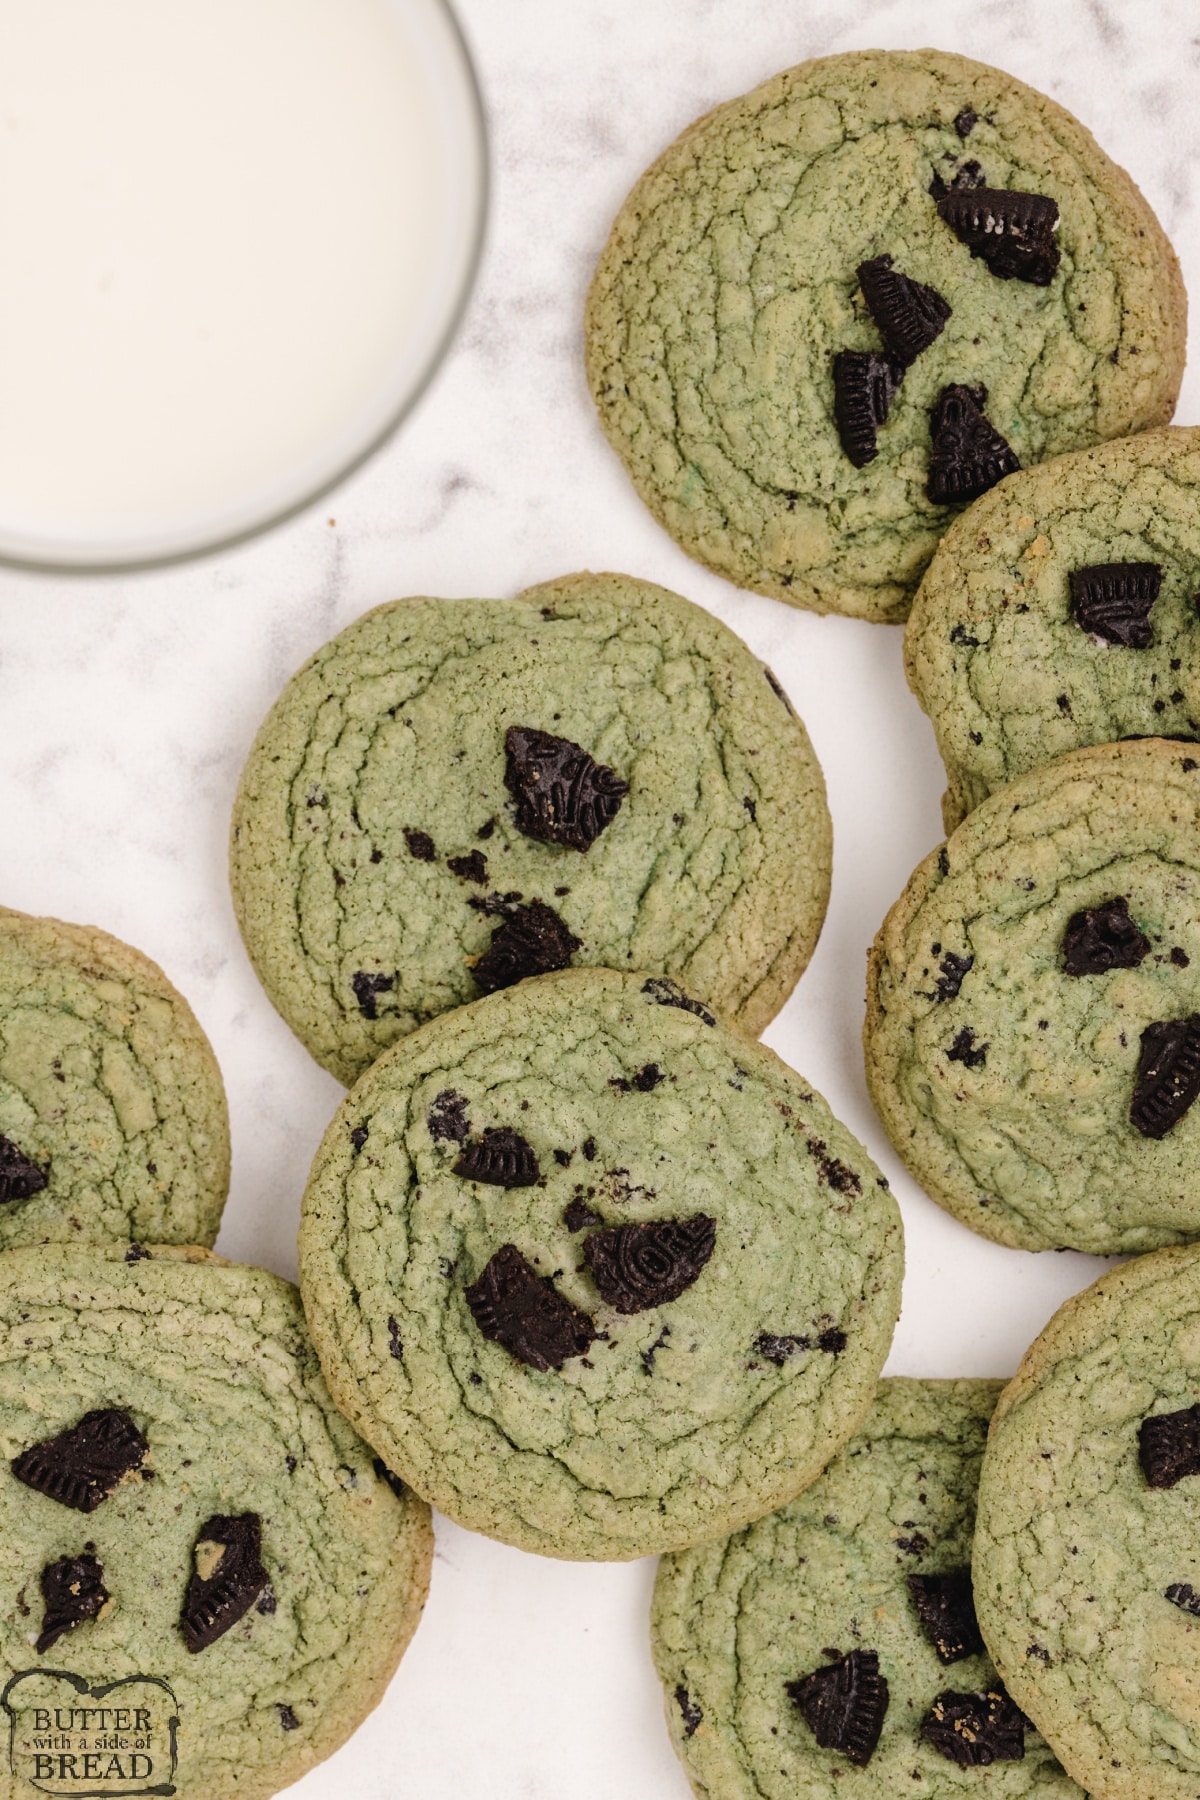 Mint cookies with Oreo pudding mix